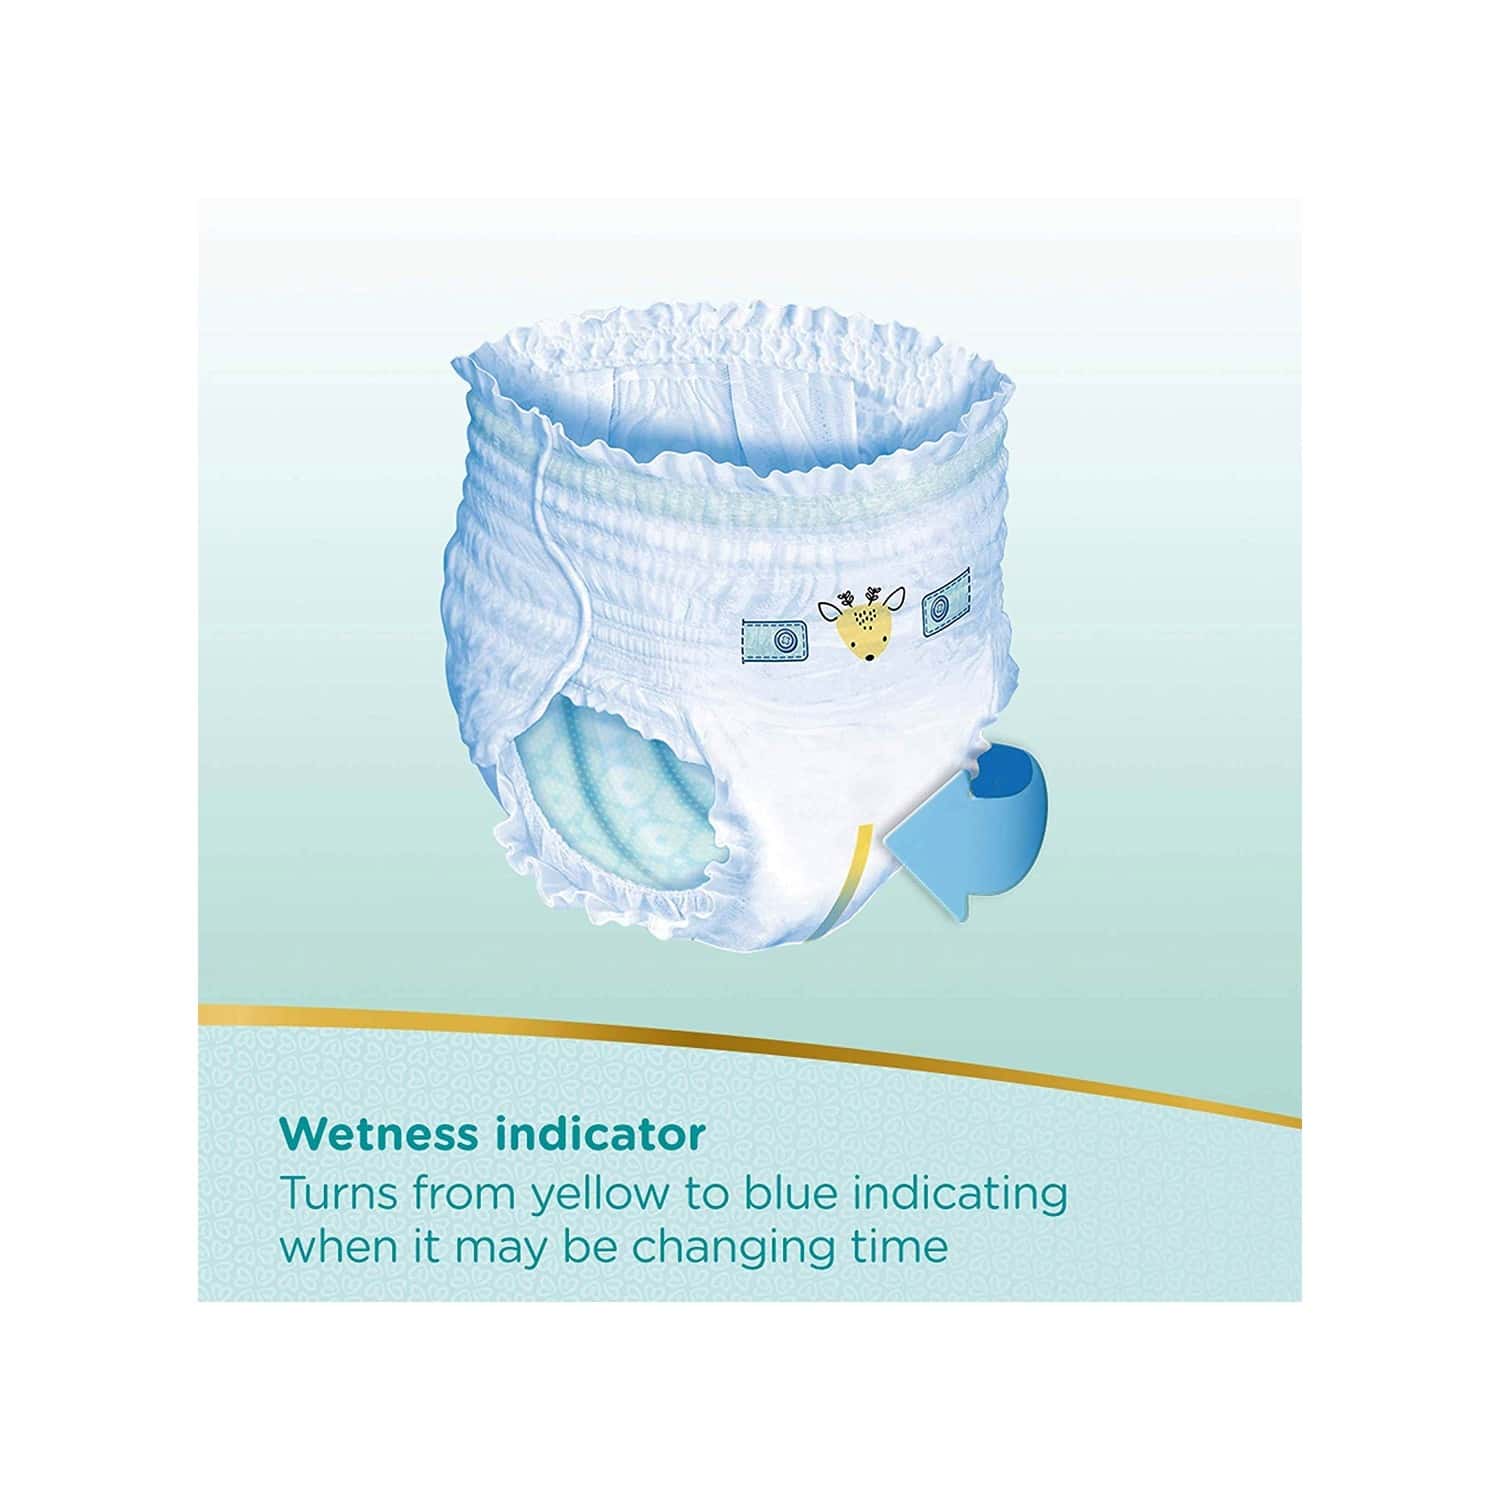 Cuddles Pant Style Diapers – S – Cuddles